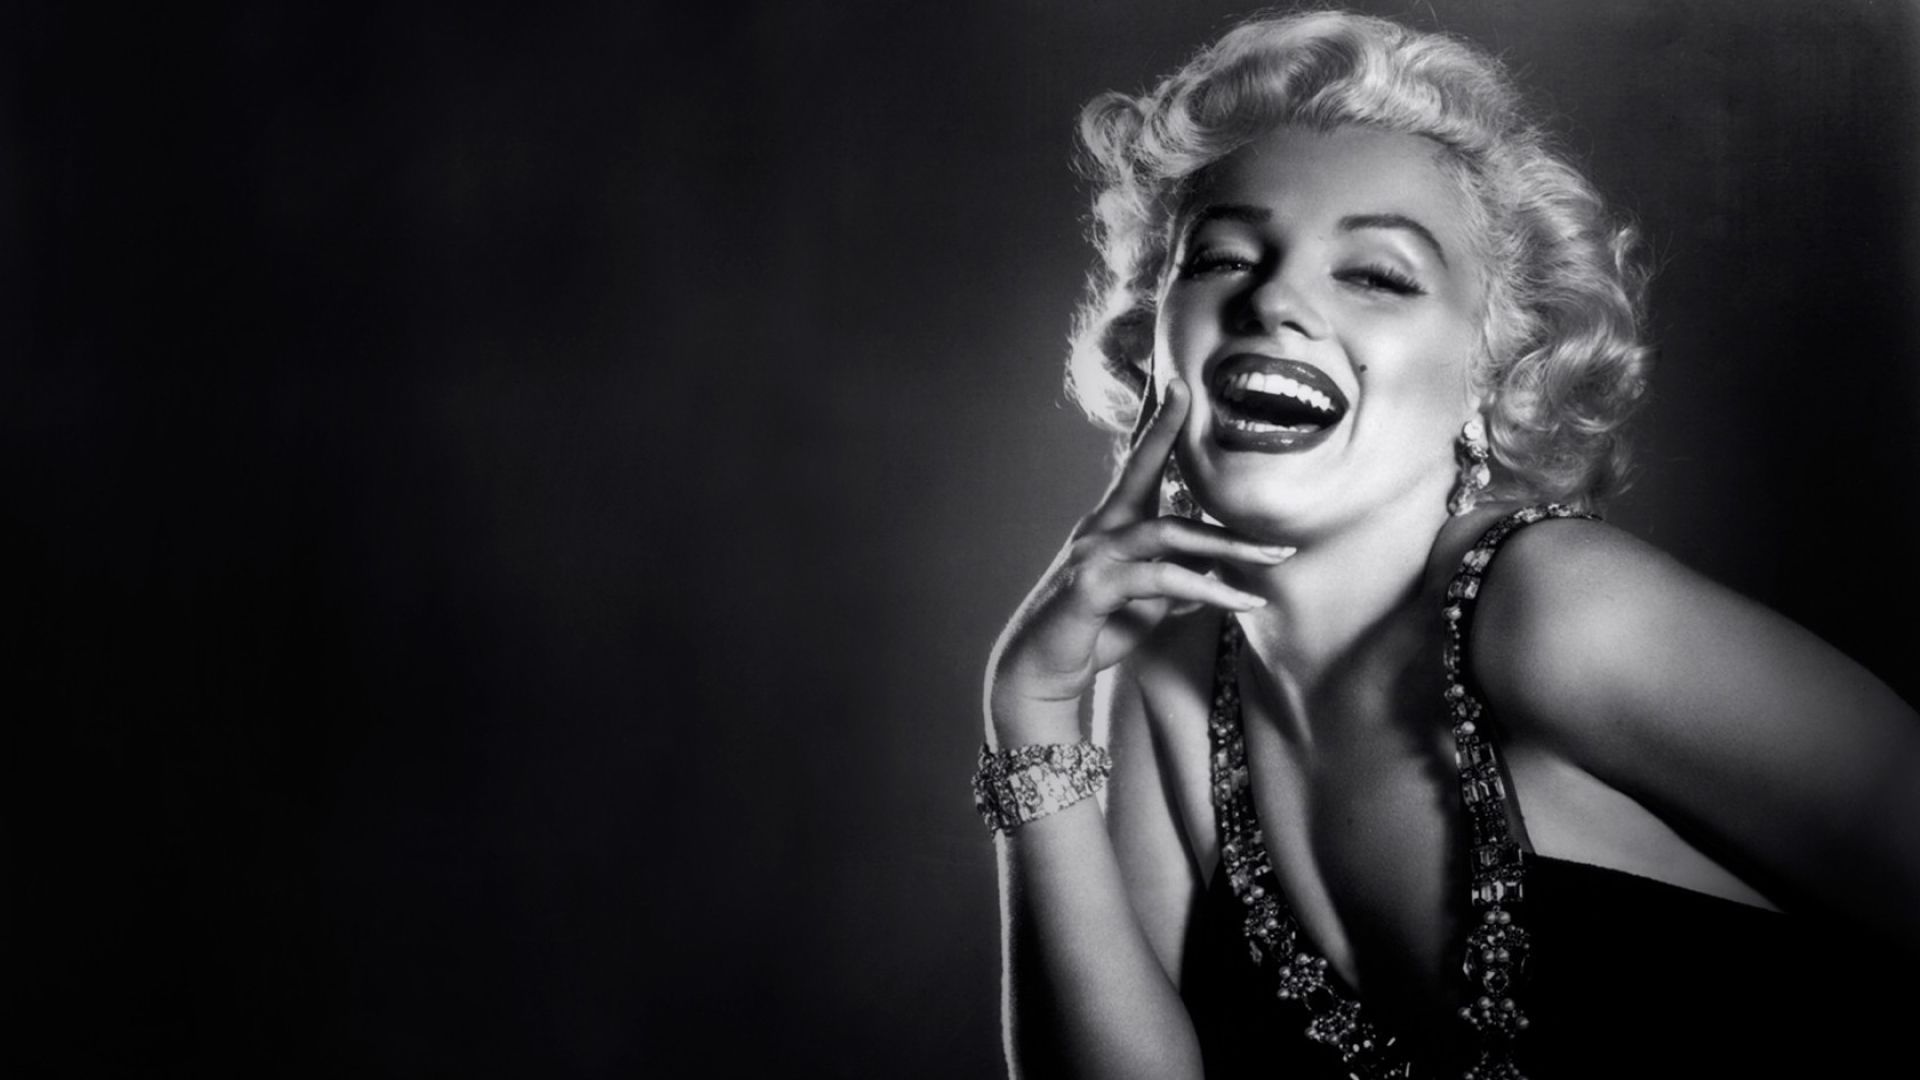 Marilyn Monroe wallpaper with high-resolution 1920x1080 pixel. You can use this wallpaper for your Windows and Mac OS computers as well as your Android and iPhone smartphones - Marilyn Monroe